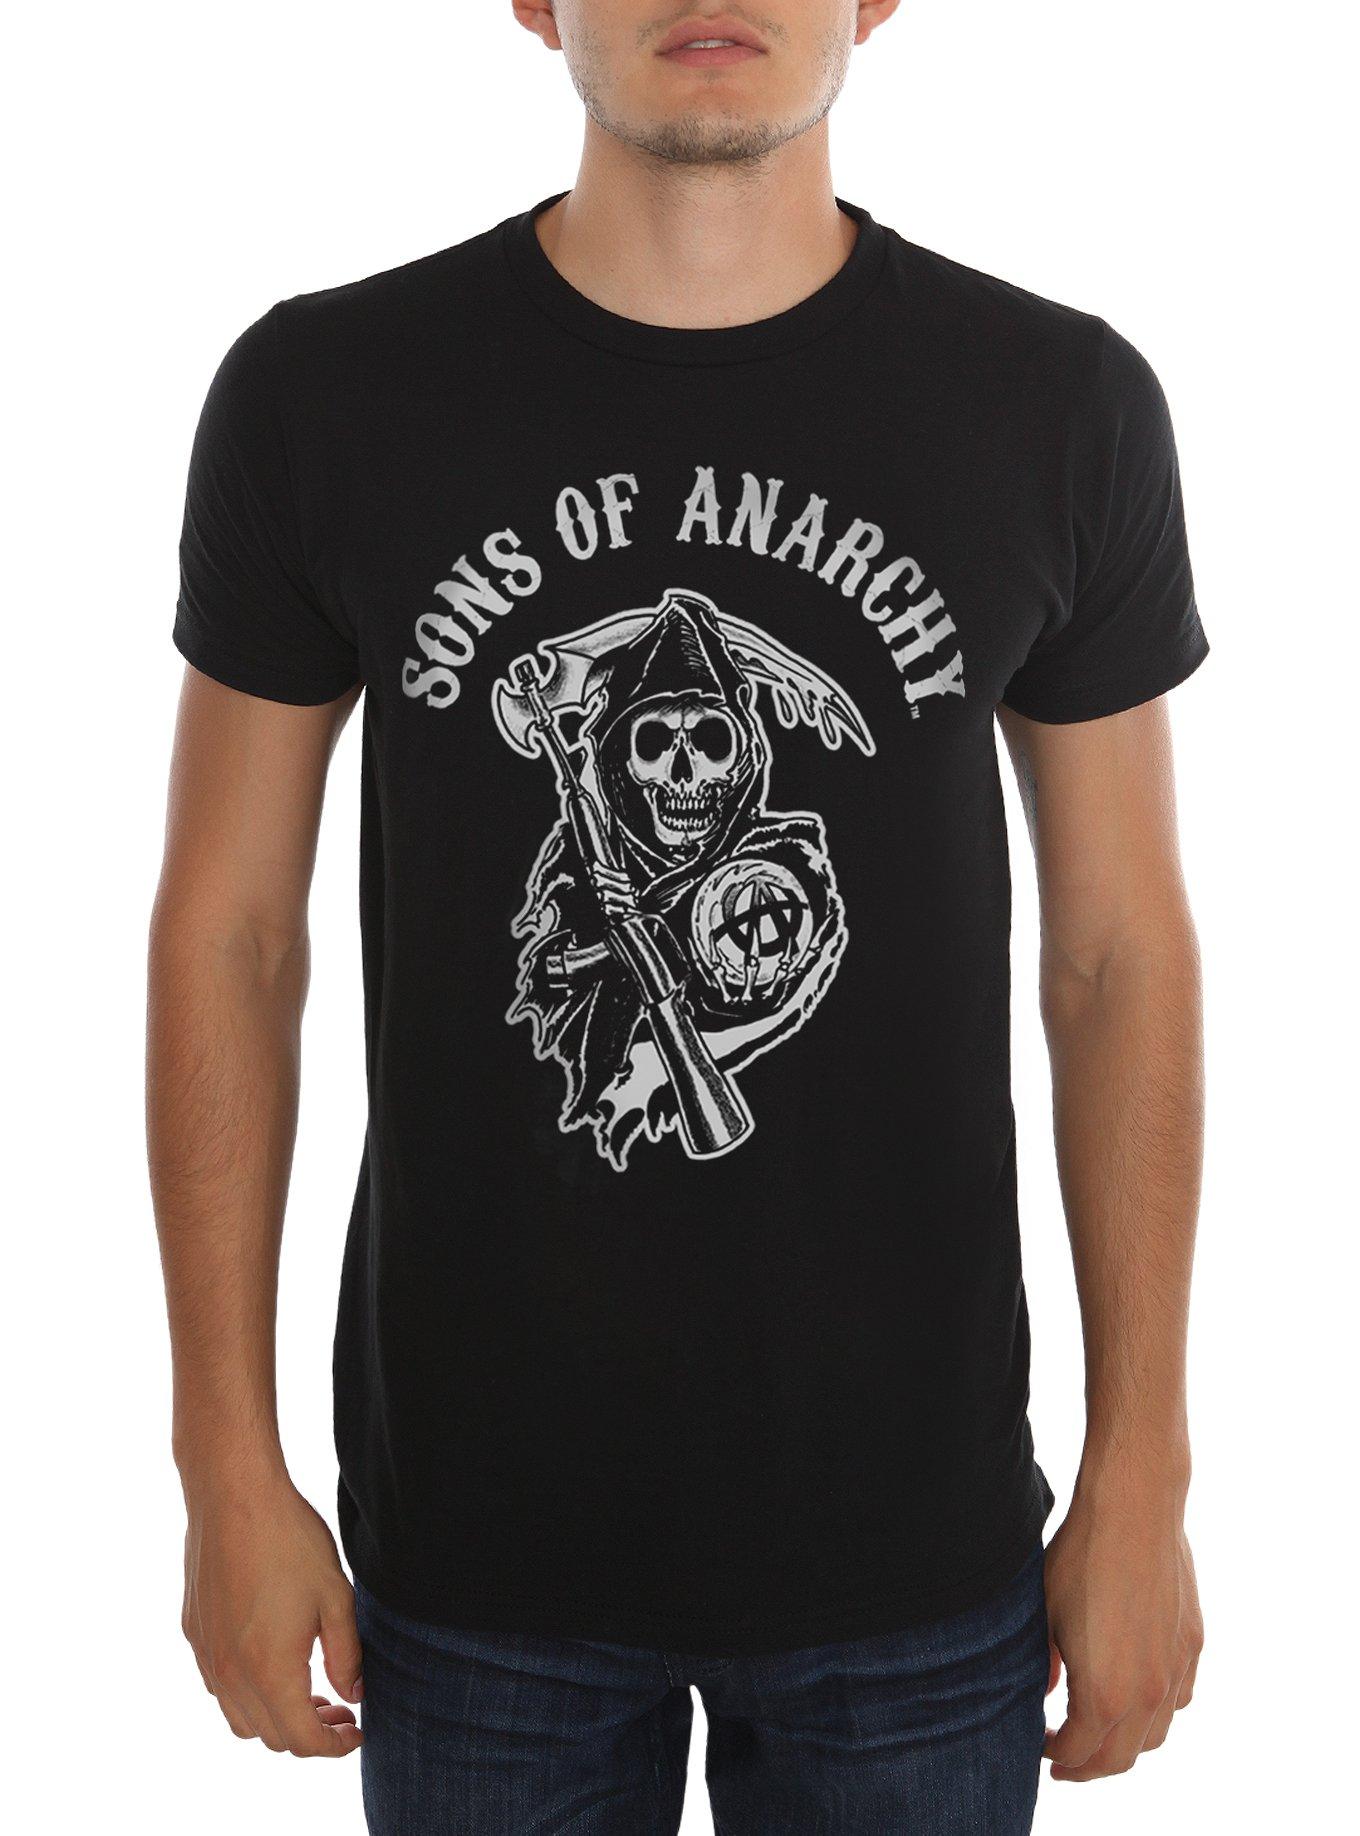 Sons Of Anarchy Logo T-Shirt | Hot Topic